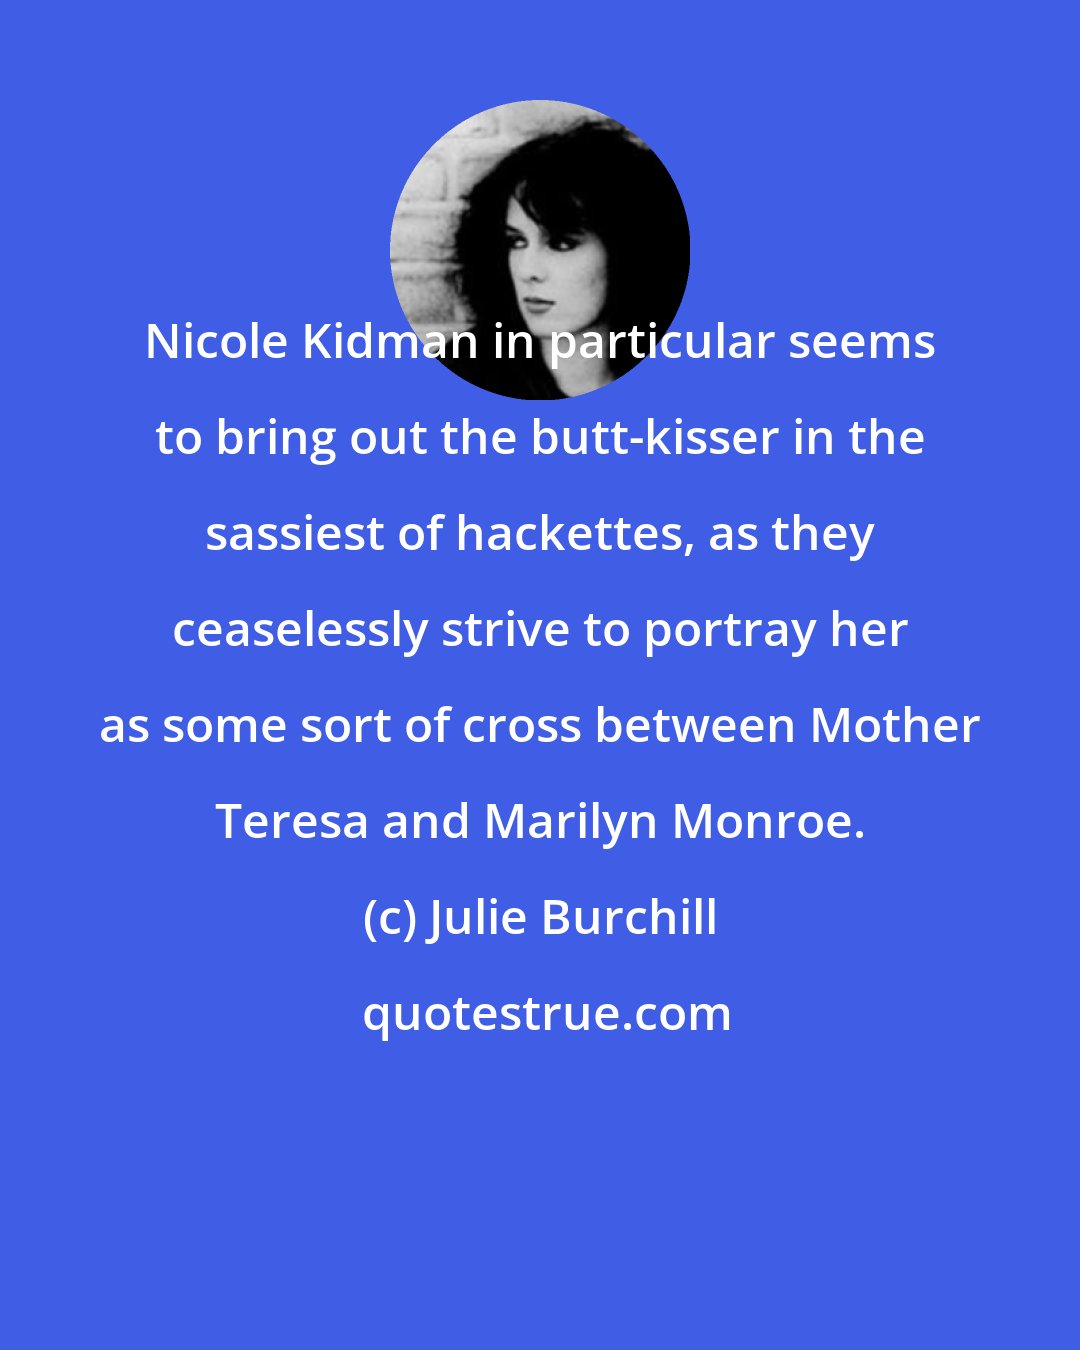 Julie Burchill: Nicole Kidman in particular seems to bring out the butt-kisser in the sassiest of hackettes, as they ceaselessly strive to portray her as some sort of cross between Mother Teresa and Marilyn Monroe.